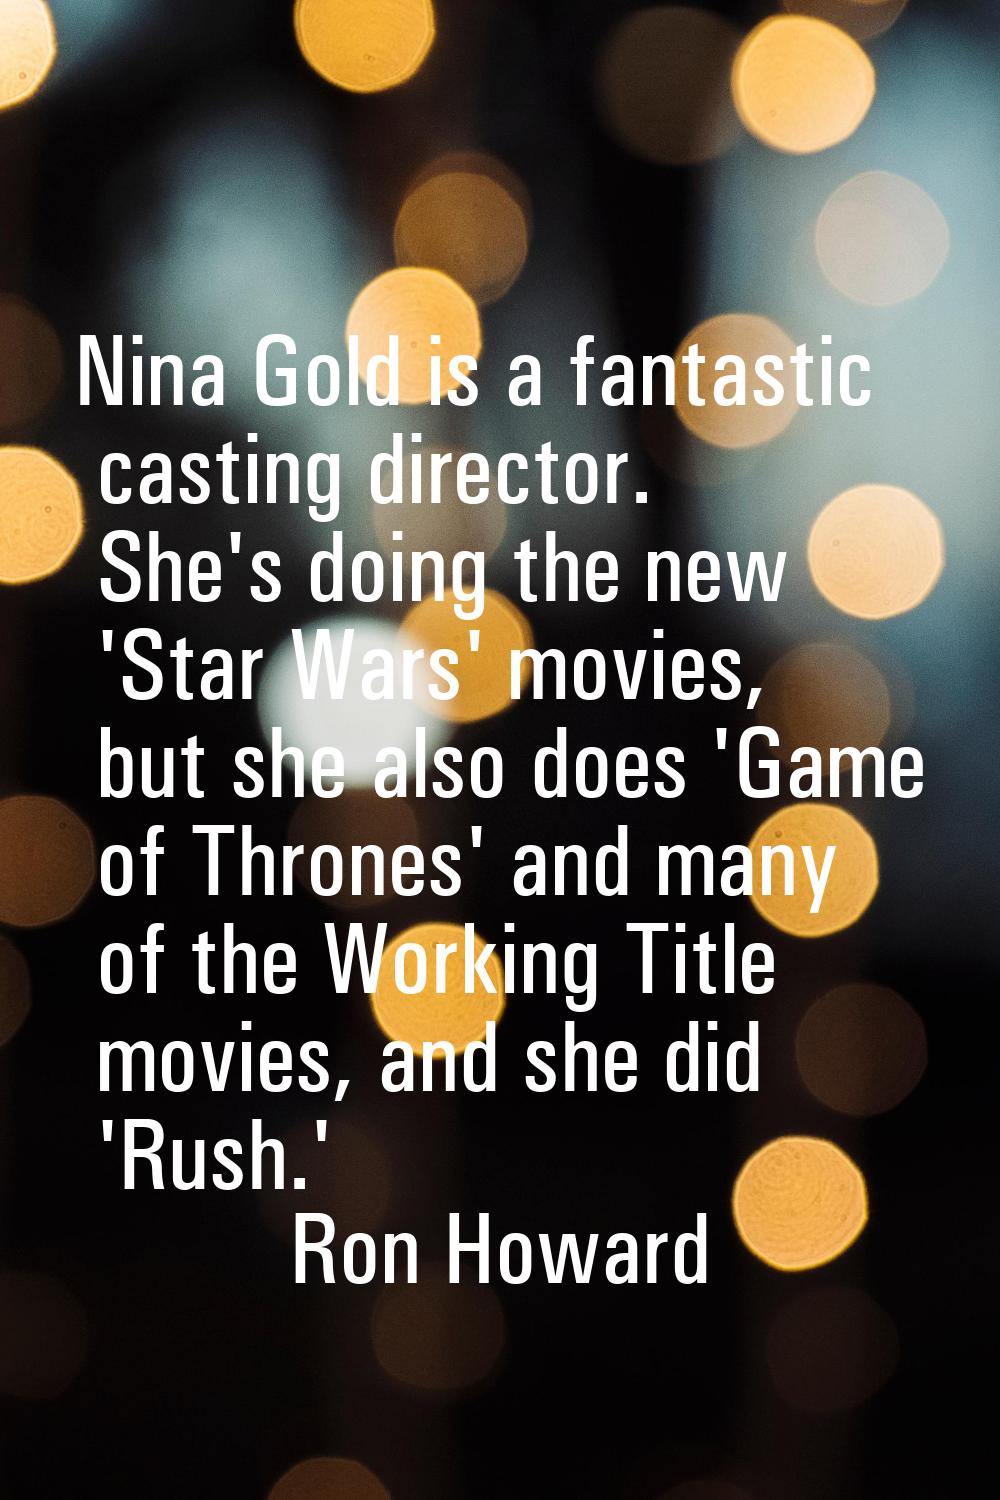 Nina Gold is a fantastic casting director. She's doing the new 'Star Wars' movies, but she also doe